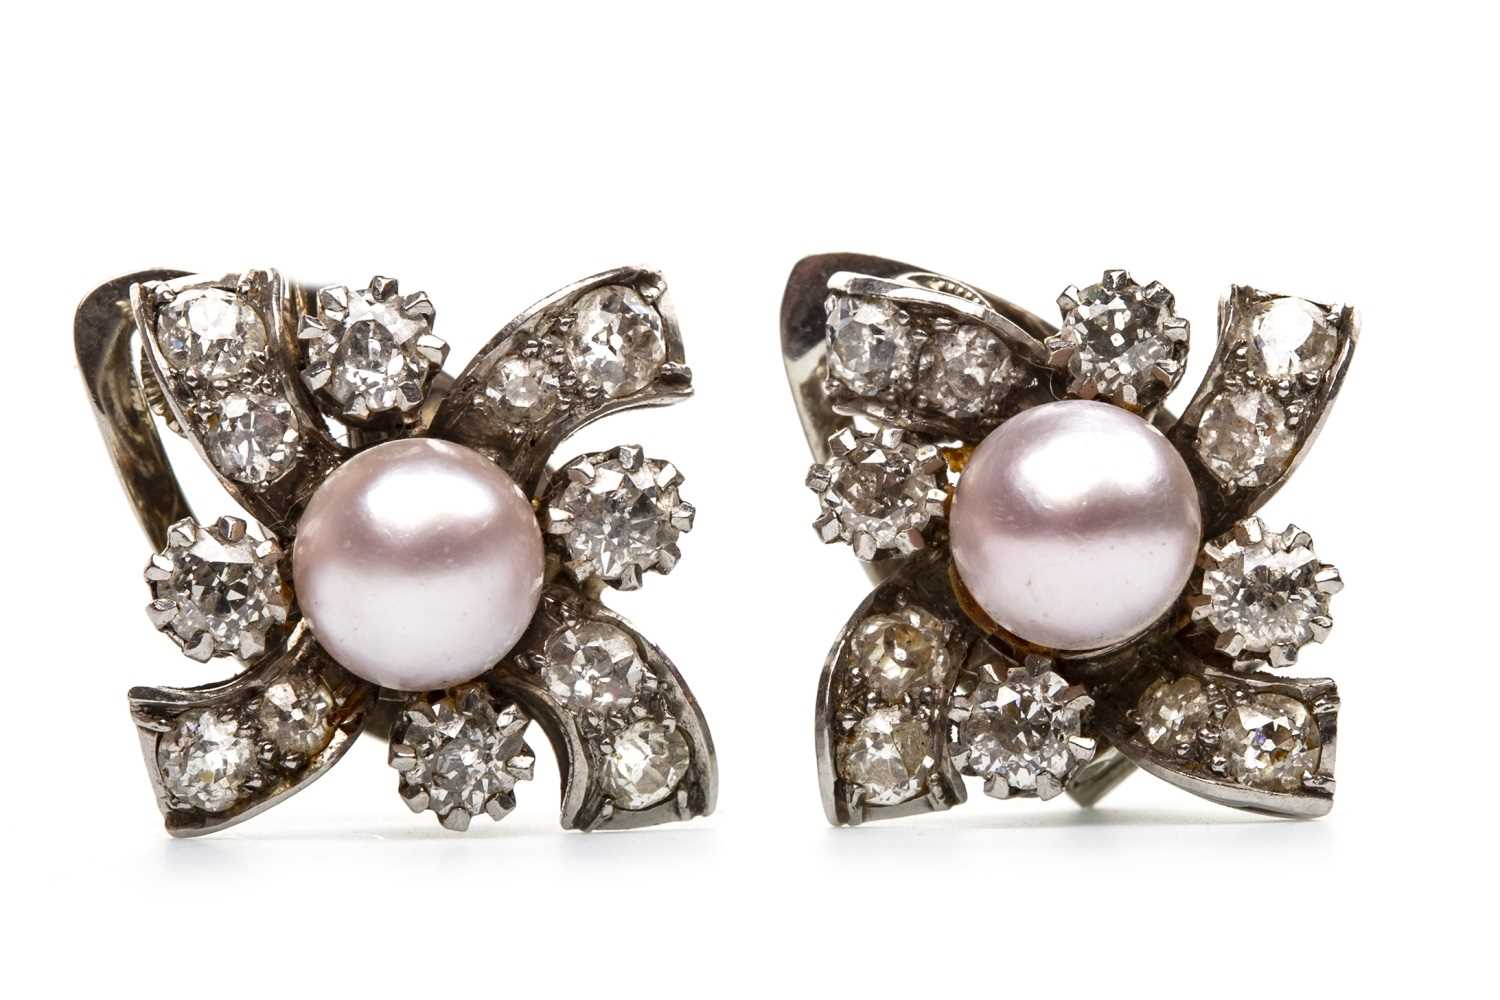 Lot 31 - A PAIR OF PINK PEARL AND DIAMOND EARRINGS